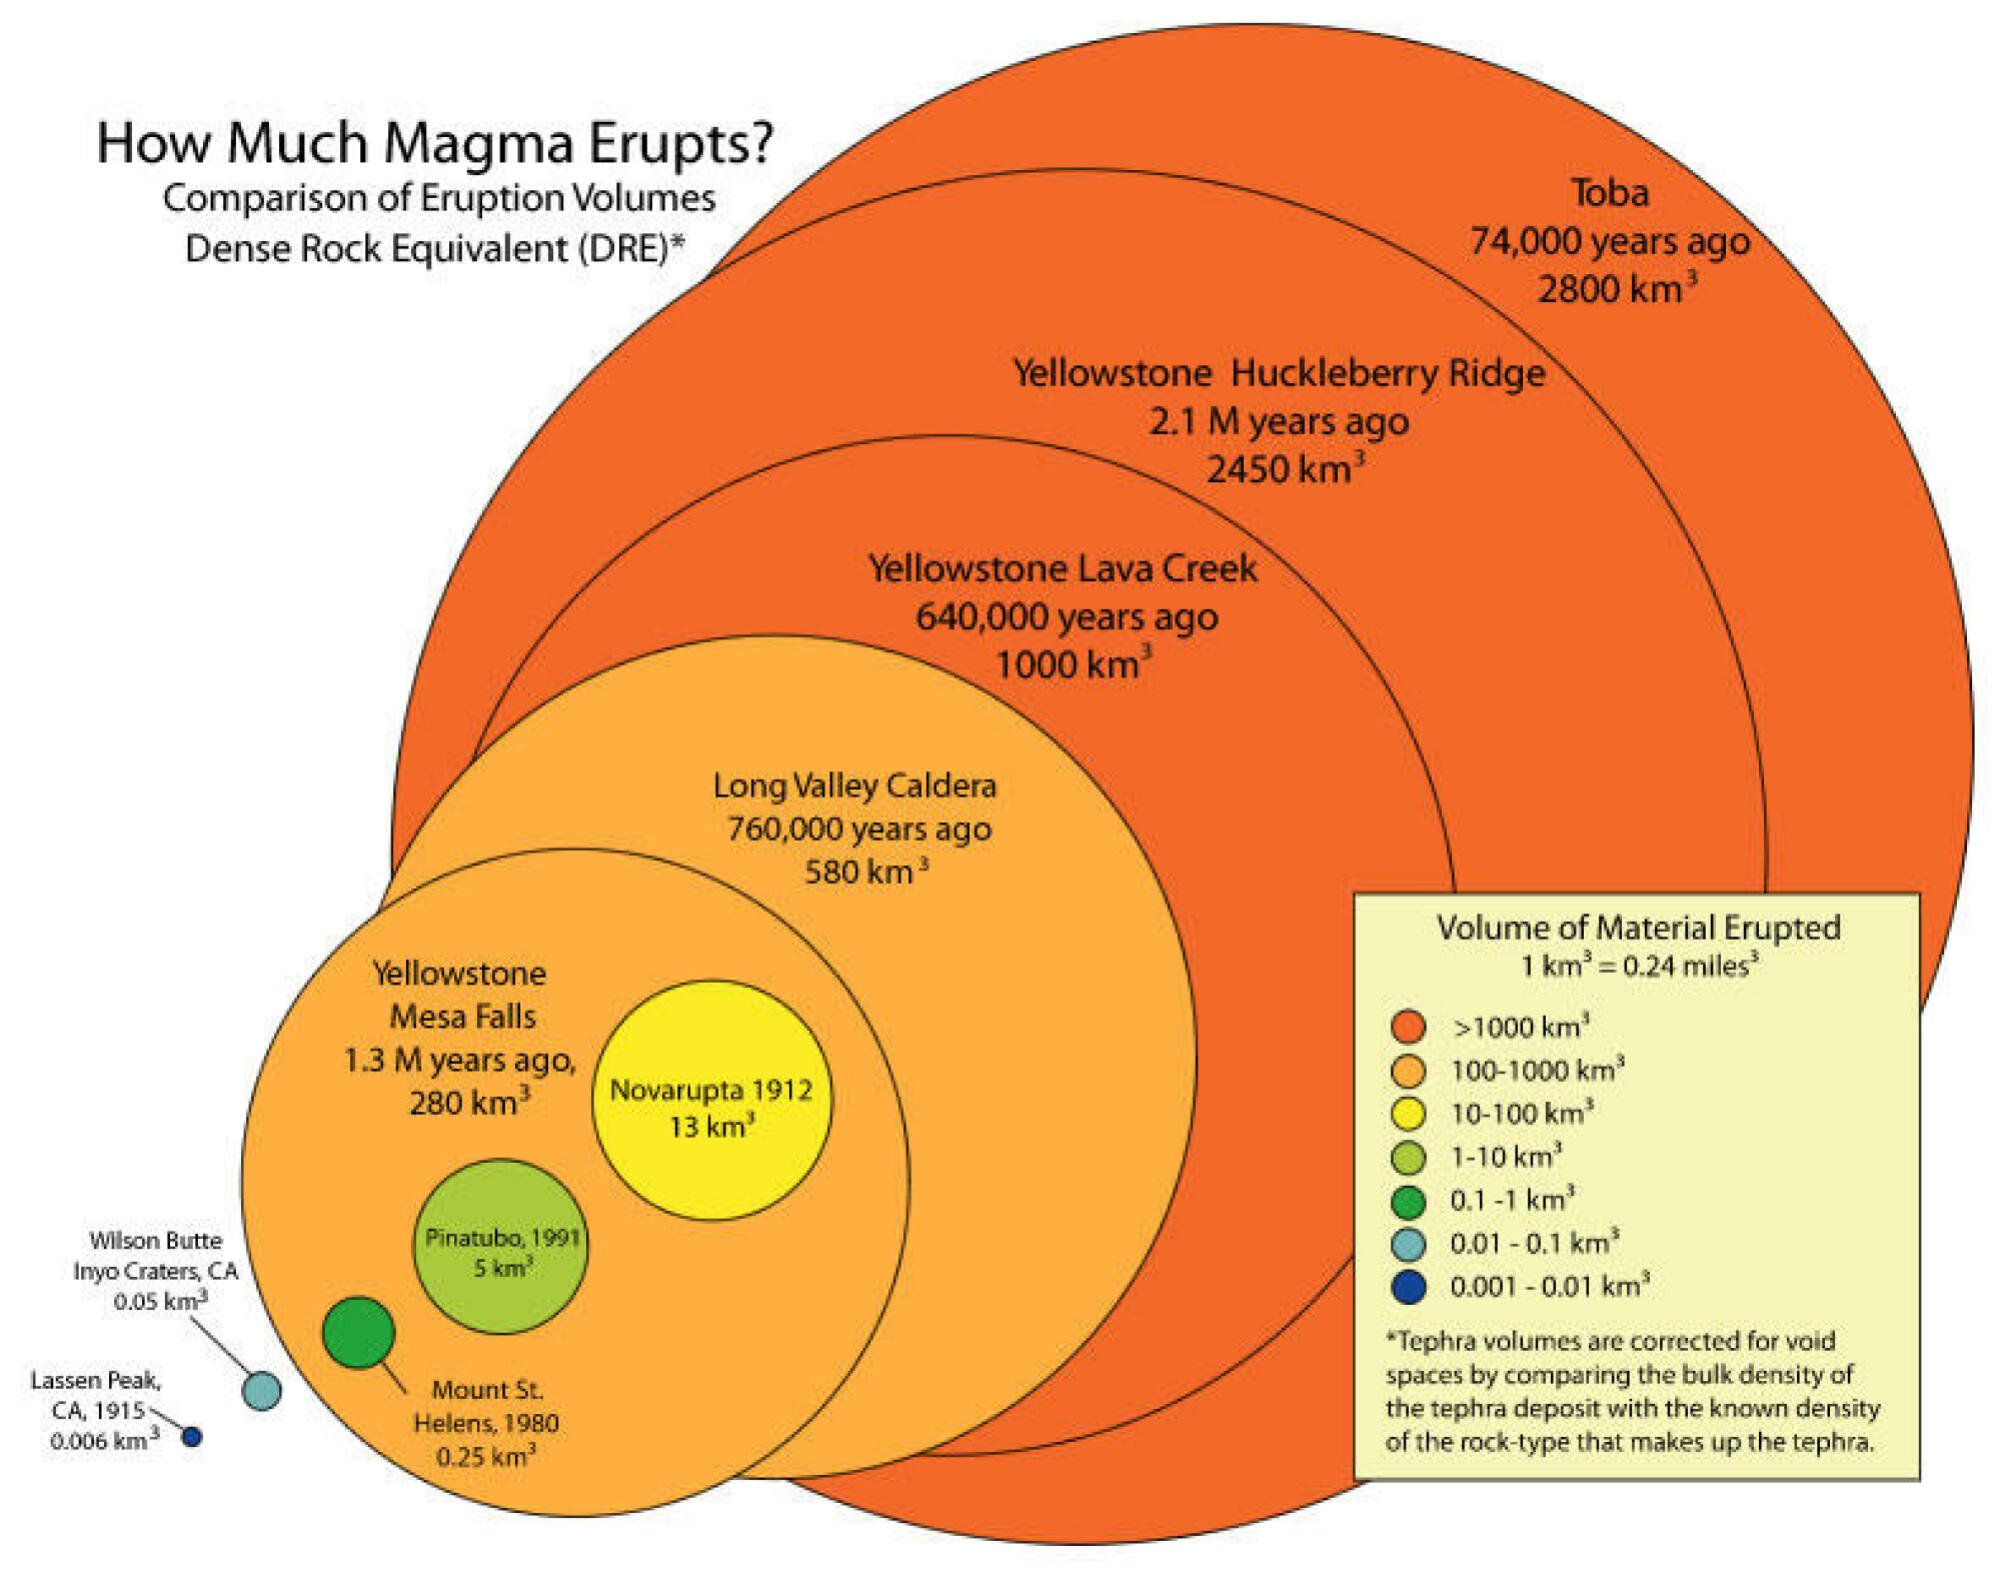 A visualization showing the scale of different eruptions. The orange circles show super-eruptions; the Mount St. Helens eruption is a small green circle on left. 